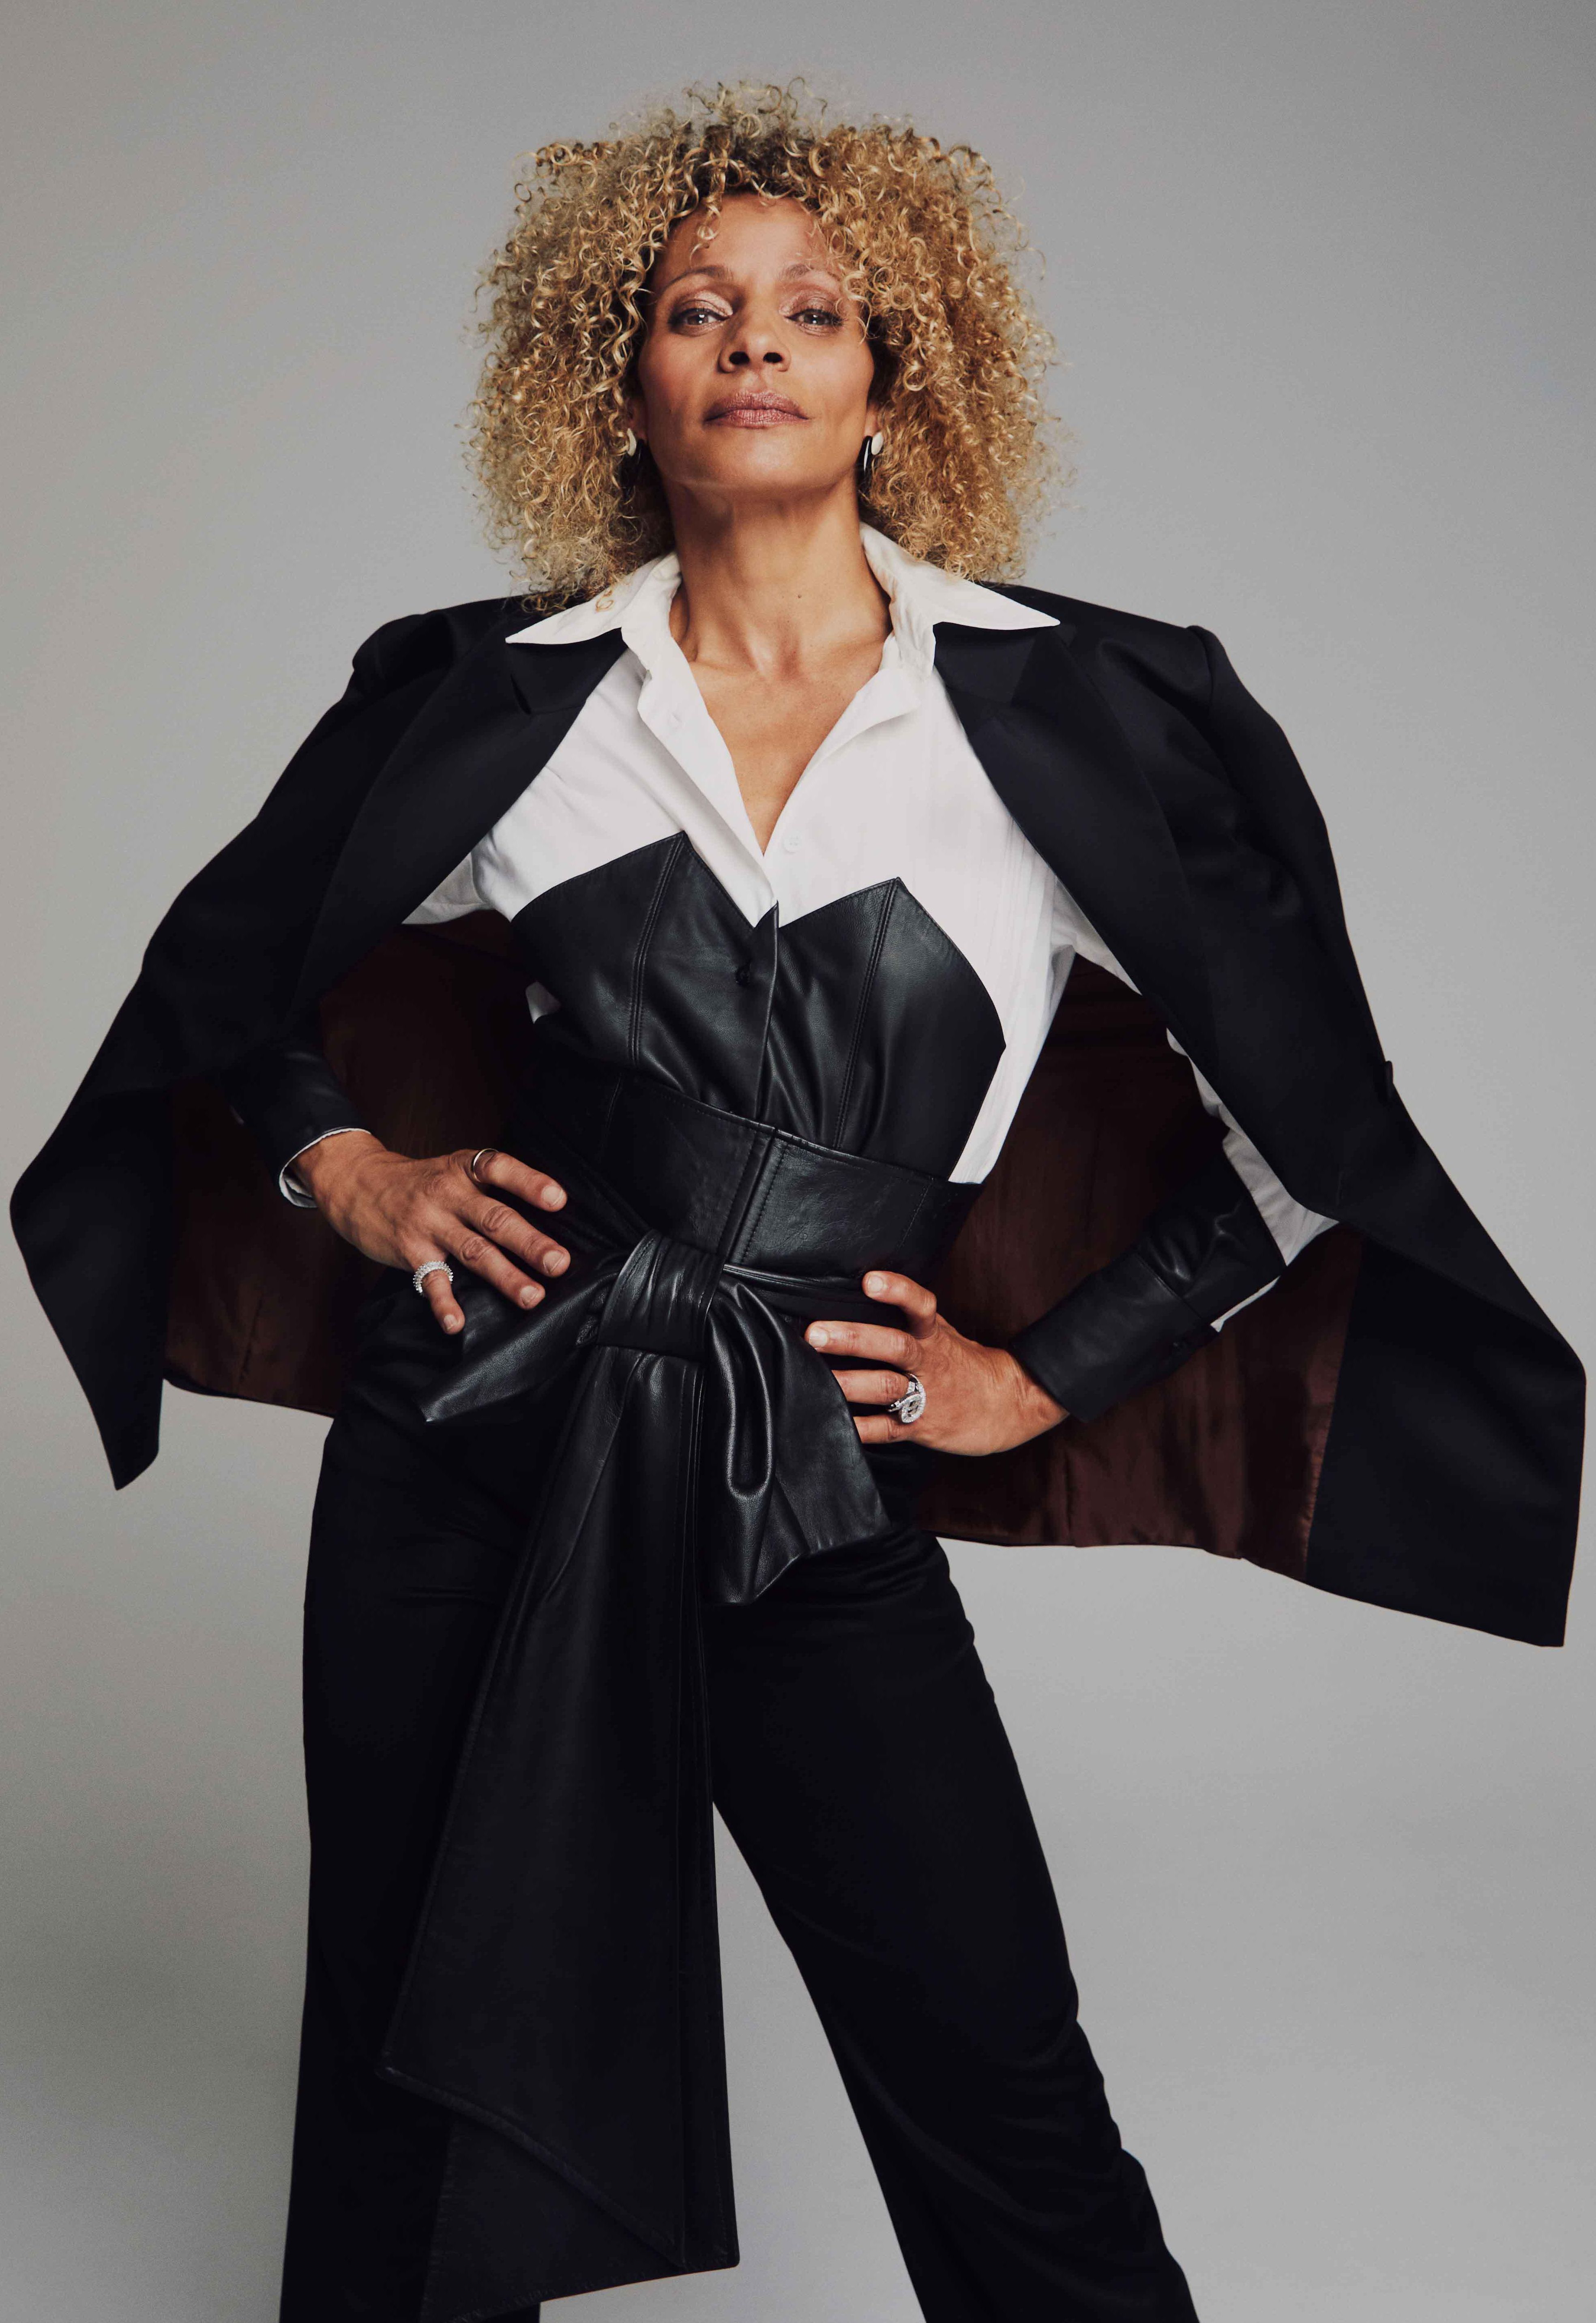 Star Trek Picard Actress Michelle Hurd wears a white shirt with a cloak and a leather vest.